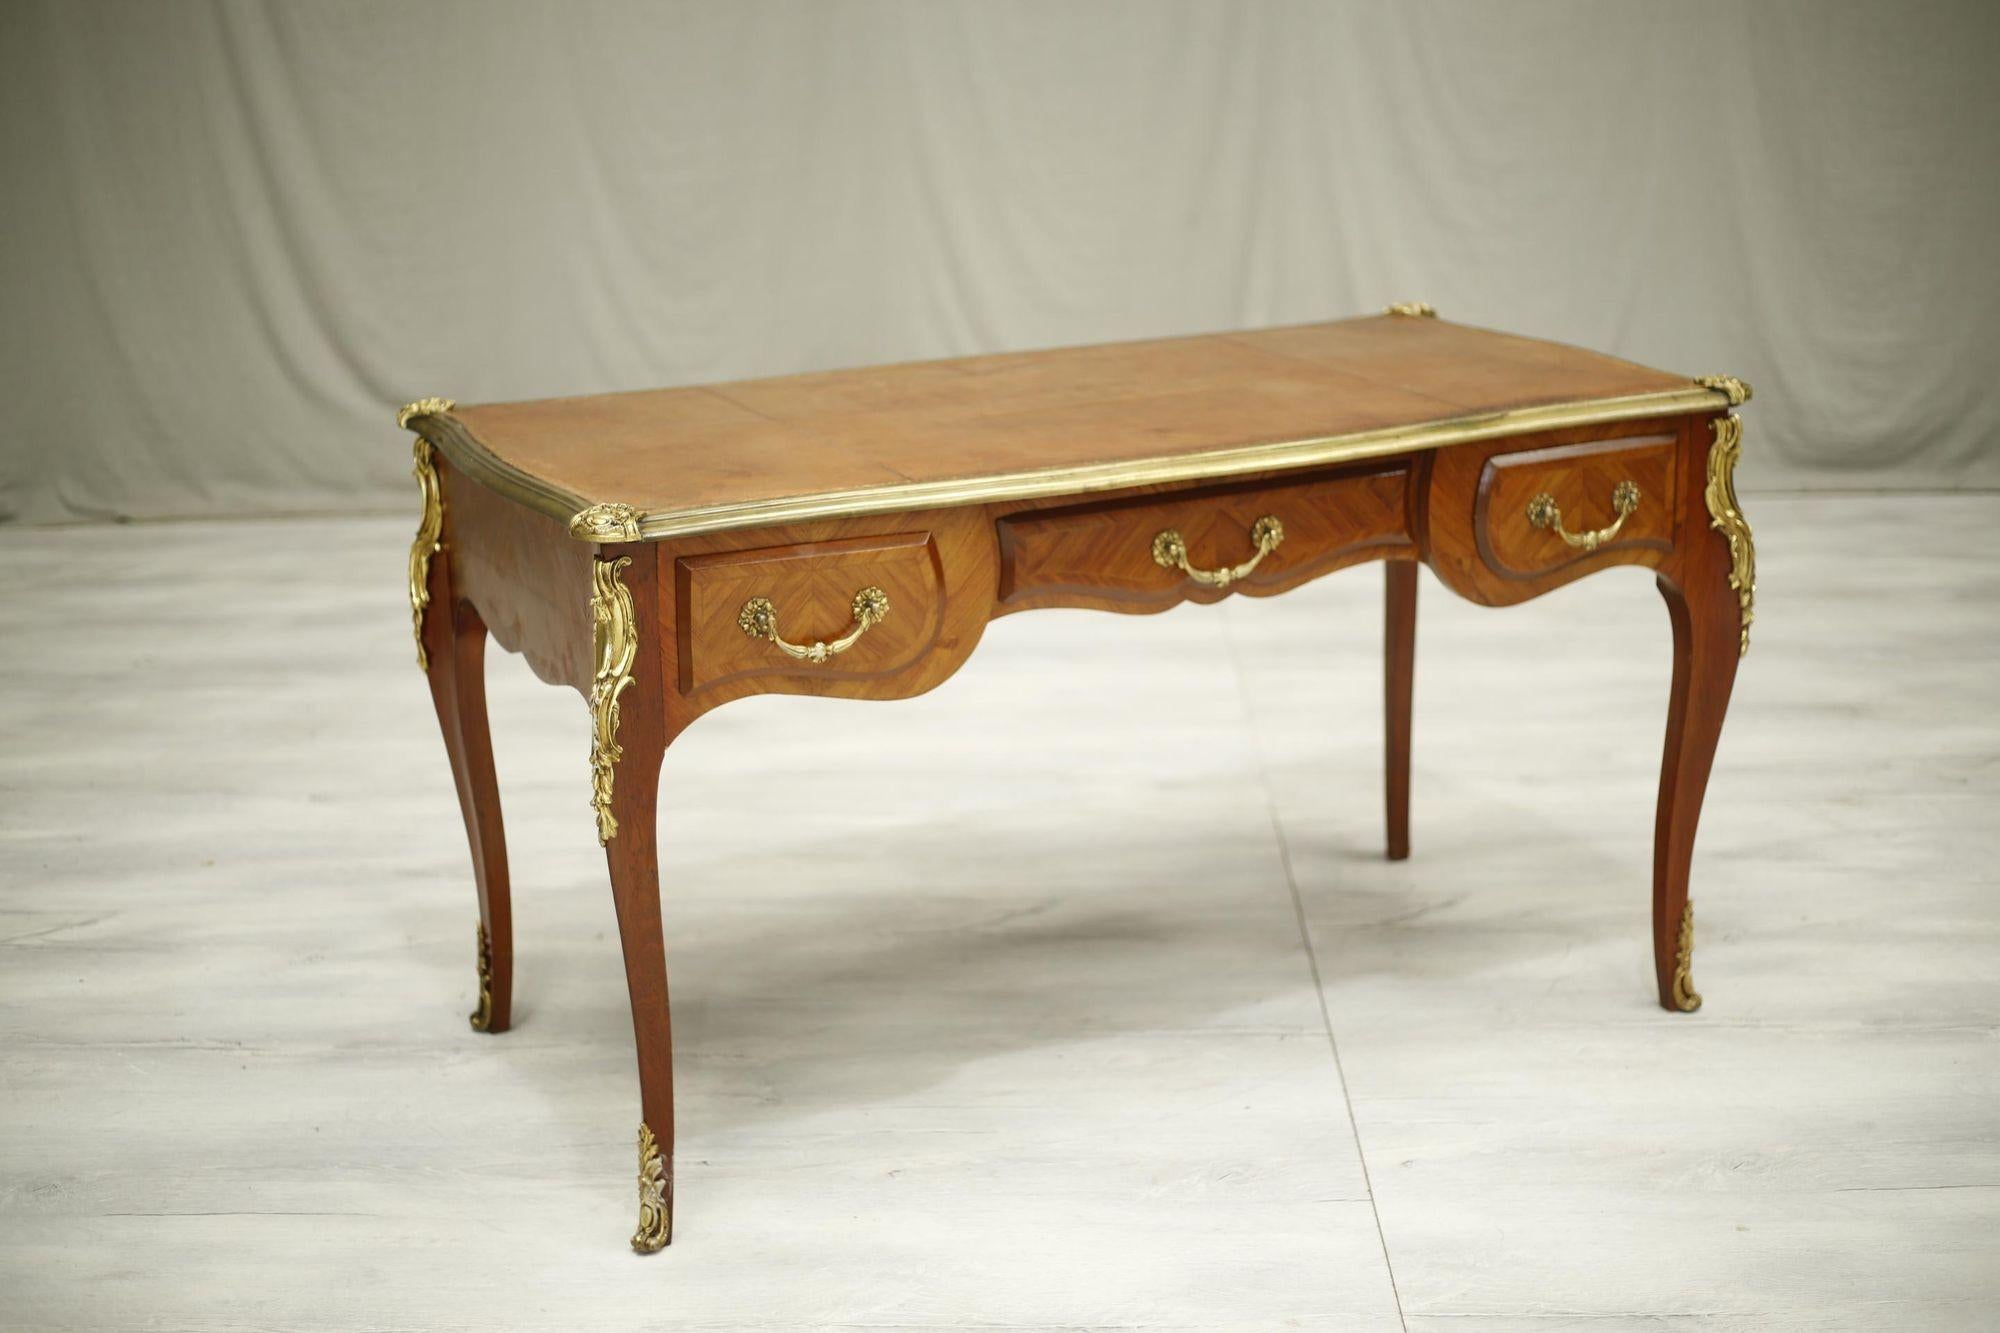 This is an exceptional quality 19th century French empire desk. The mahogany and red leather top are in very attractive original condition with brass mounts on each leg and the top boarded with brass edge which I absolutely love. Great patina to the